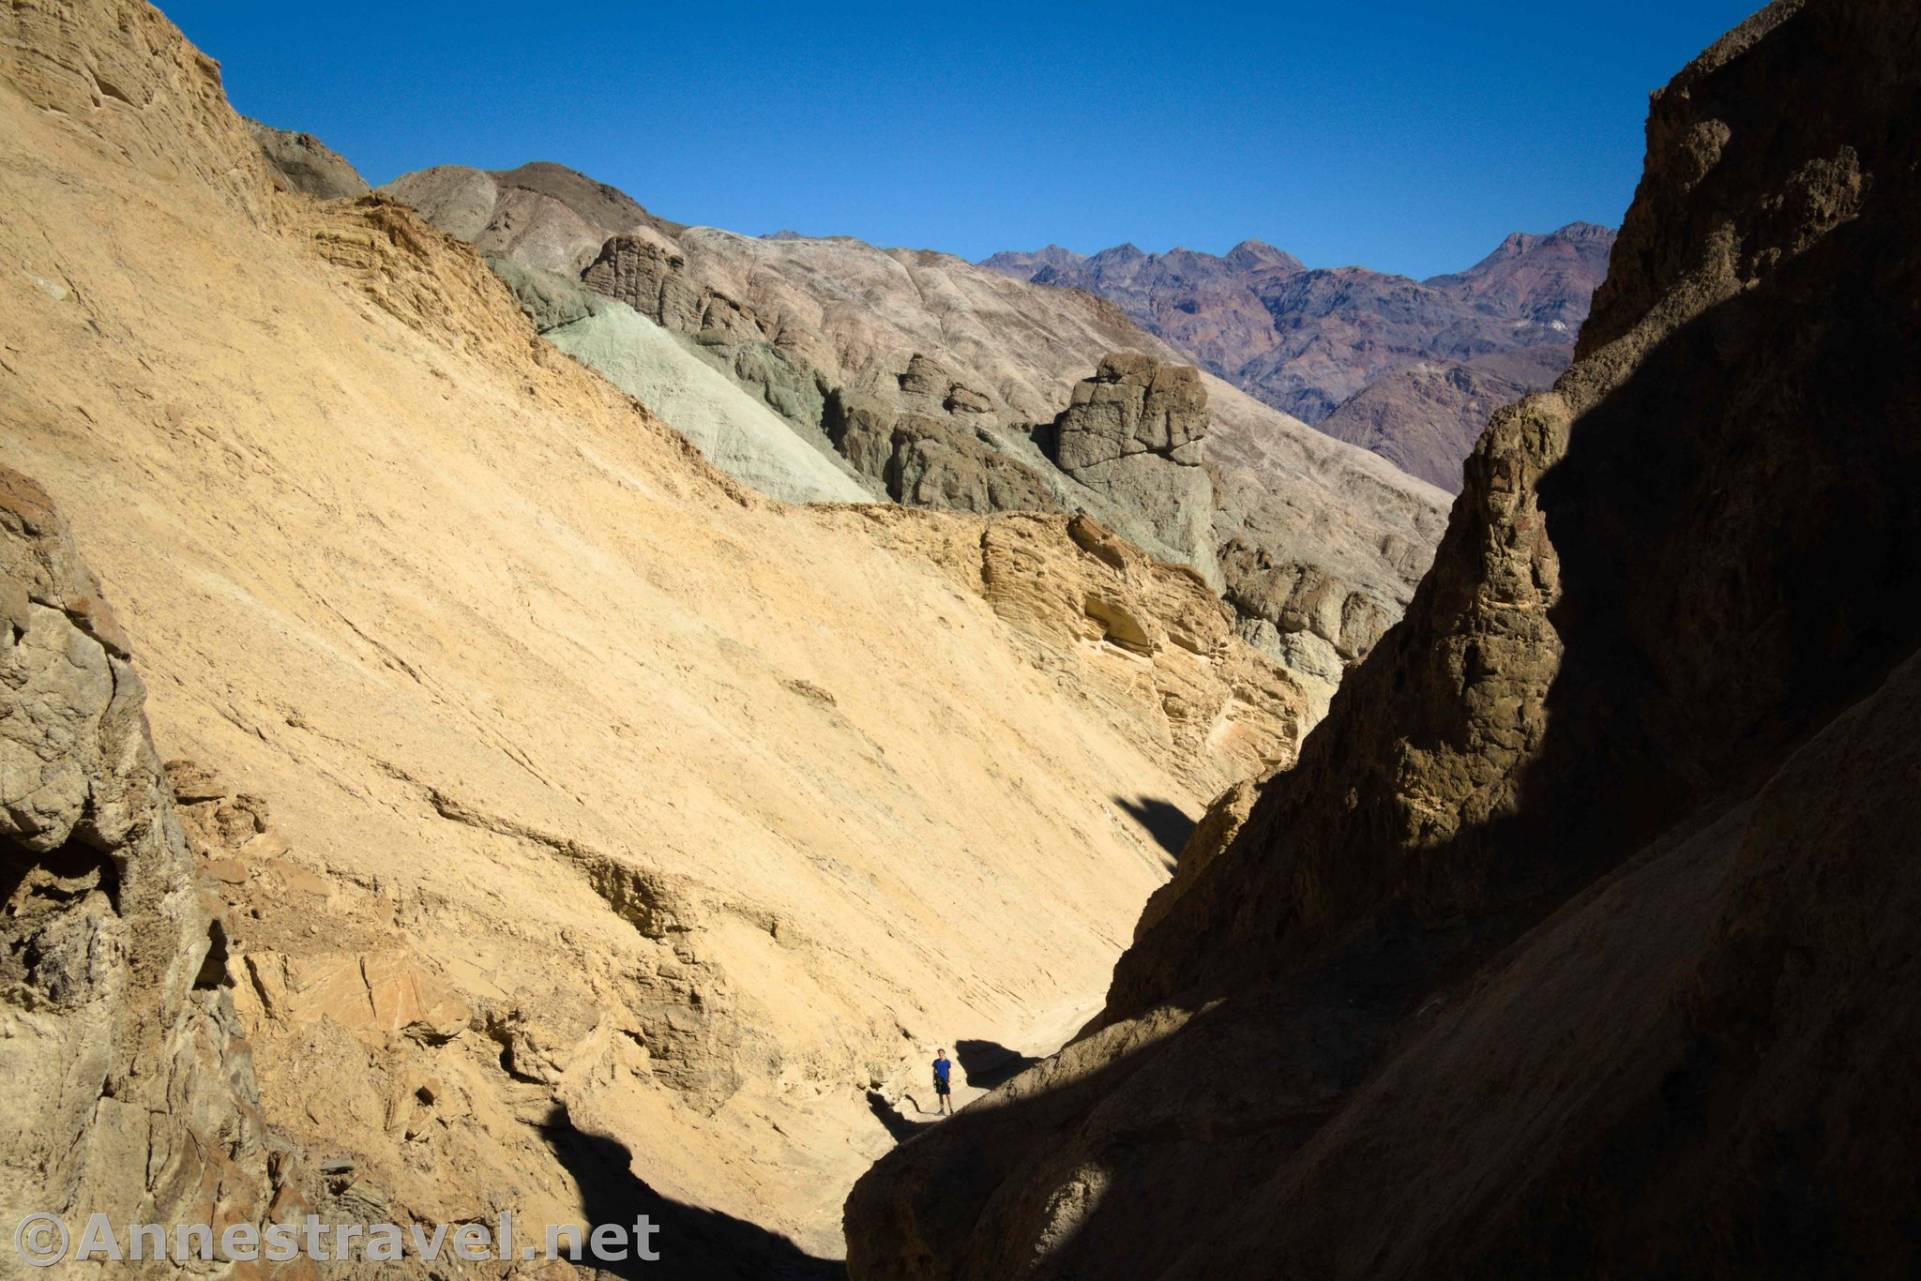 20 Mule Team Canyon, Death Valley National Park, California